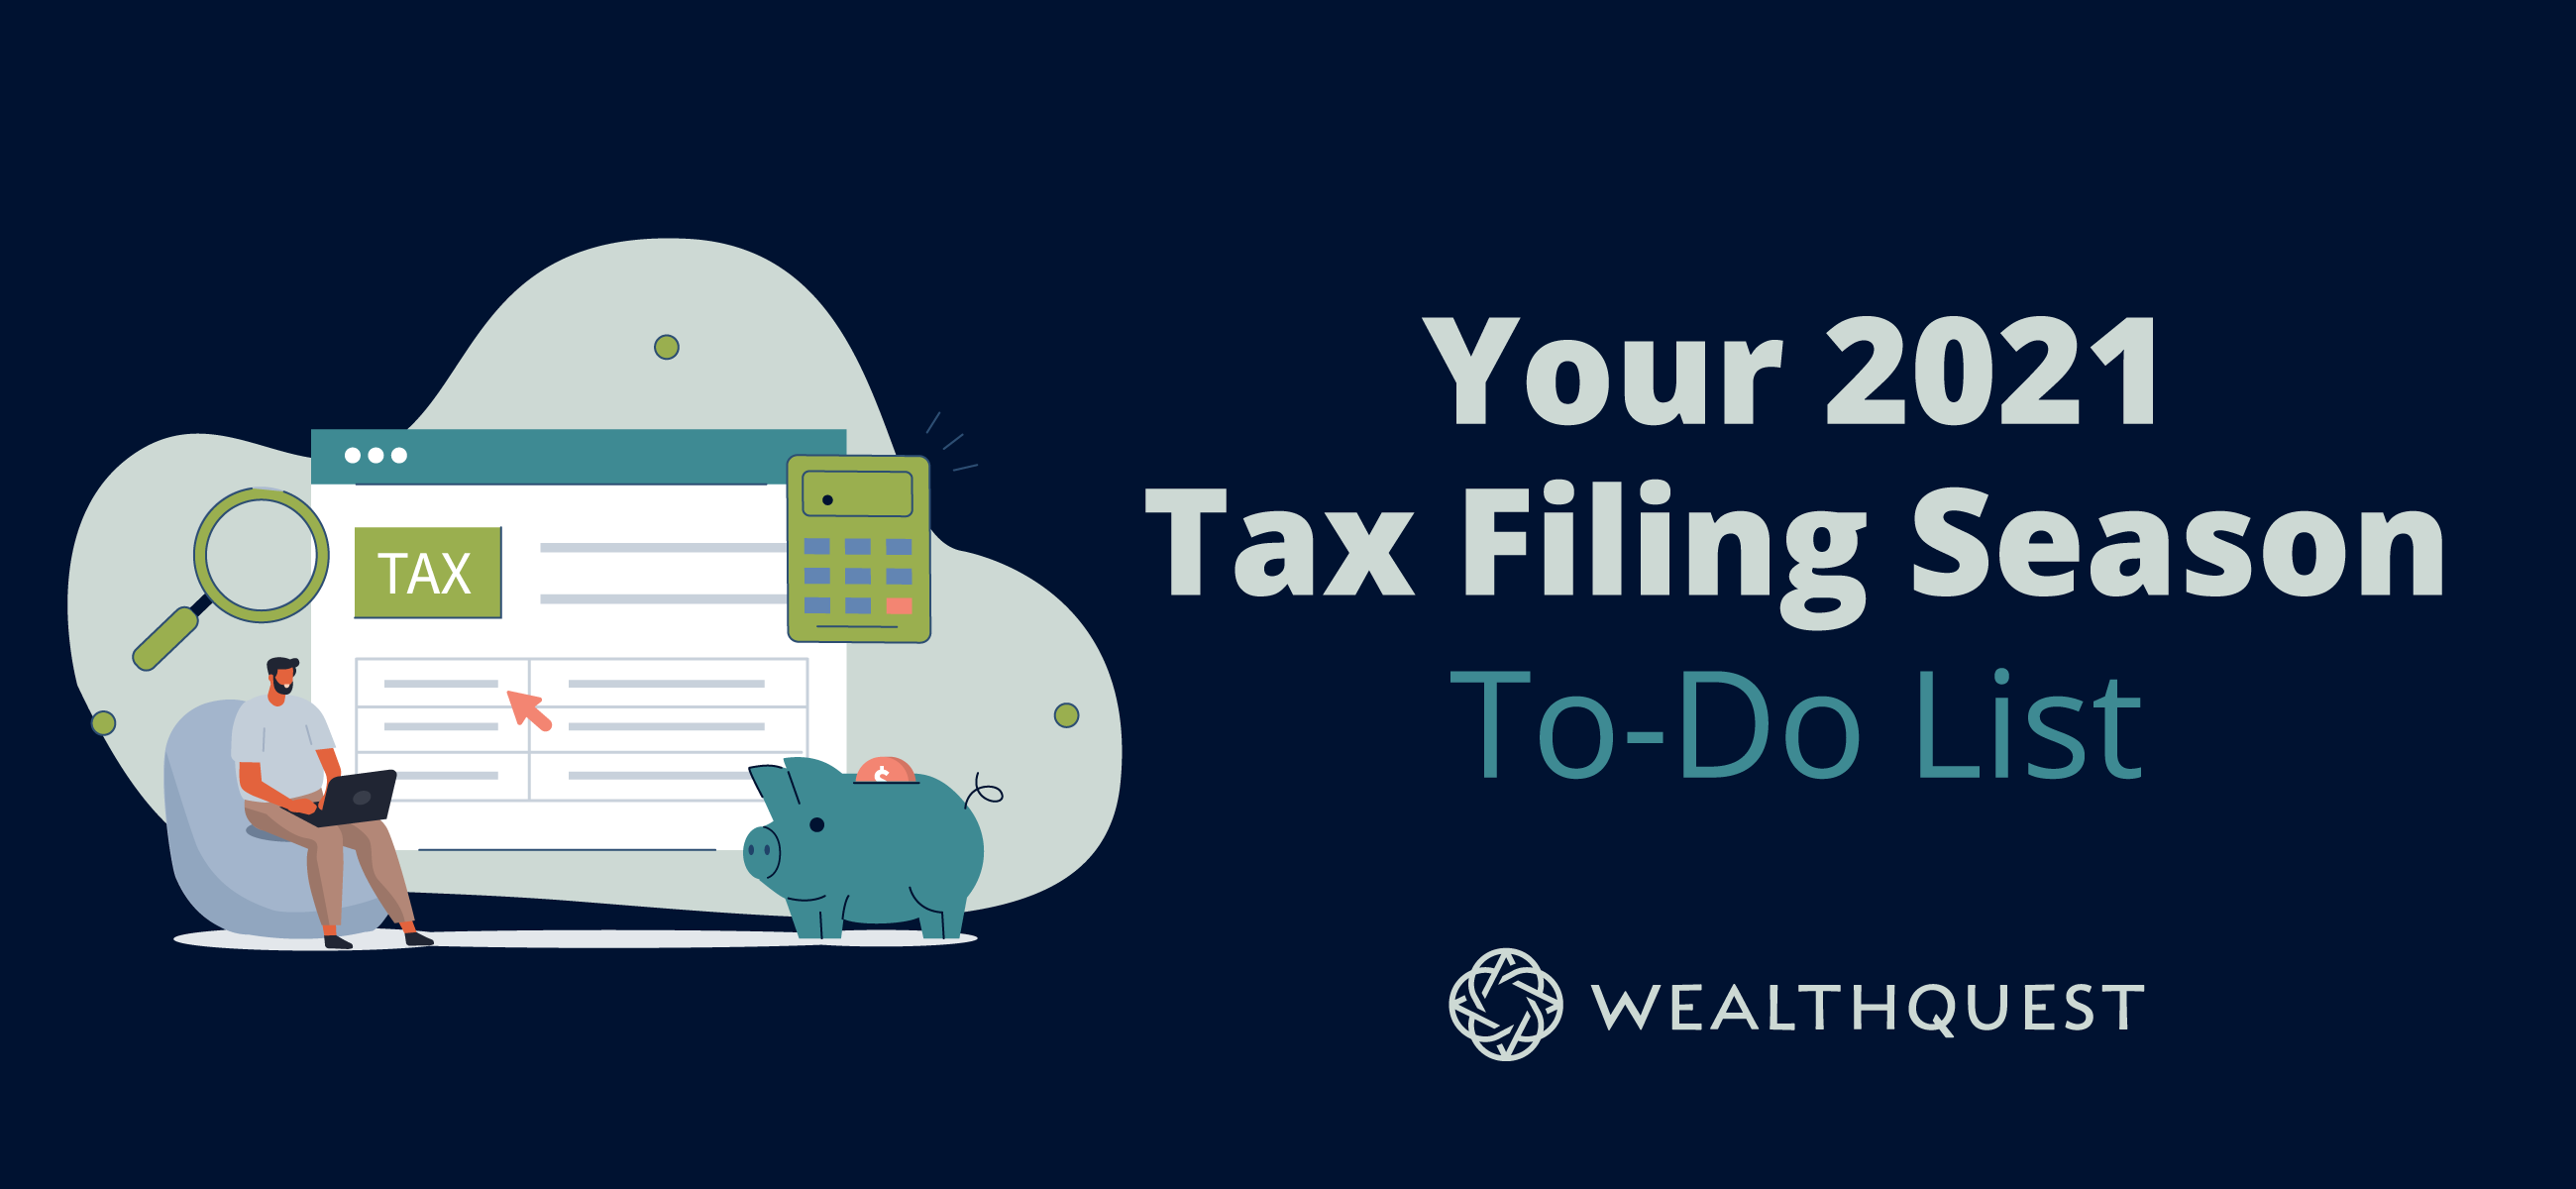 Your 2021 Tax Filing Season To